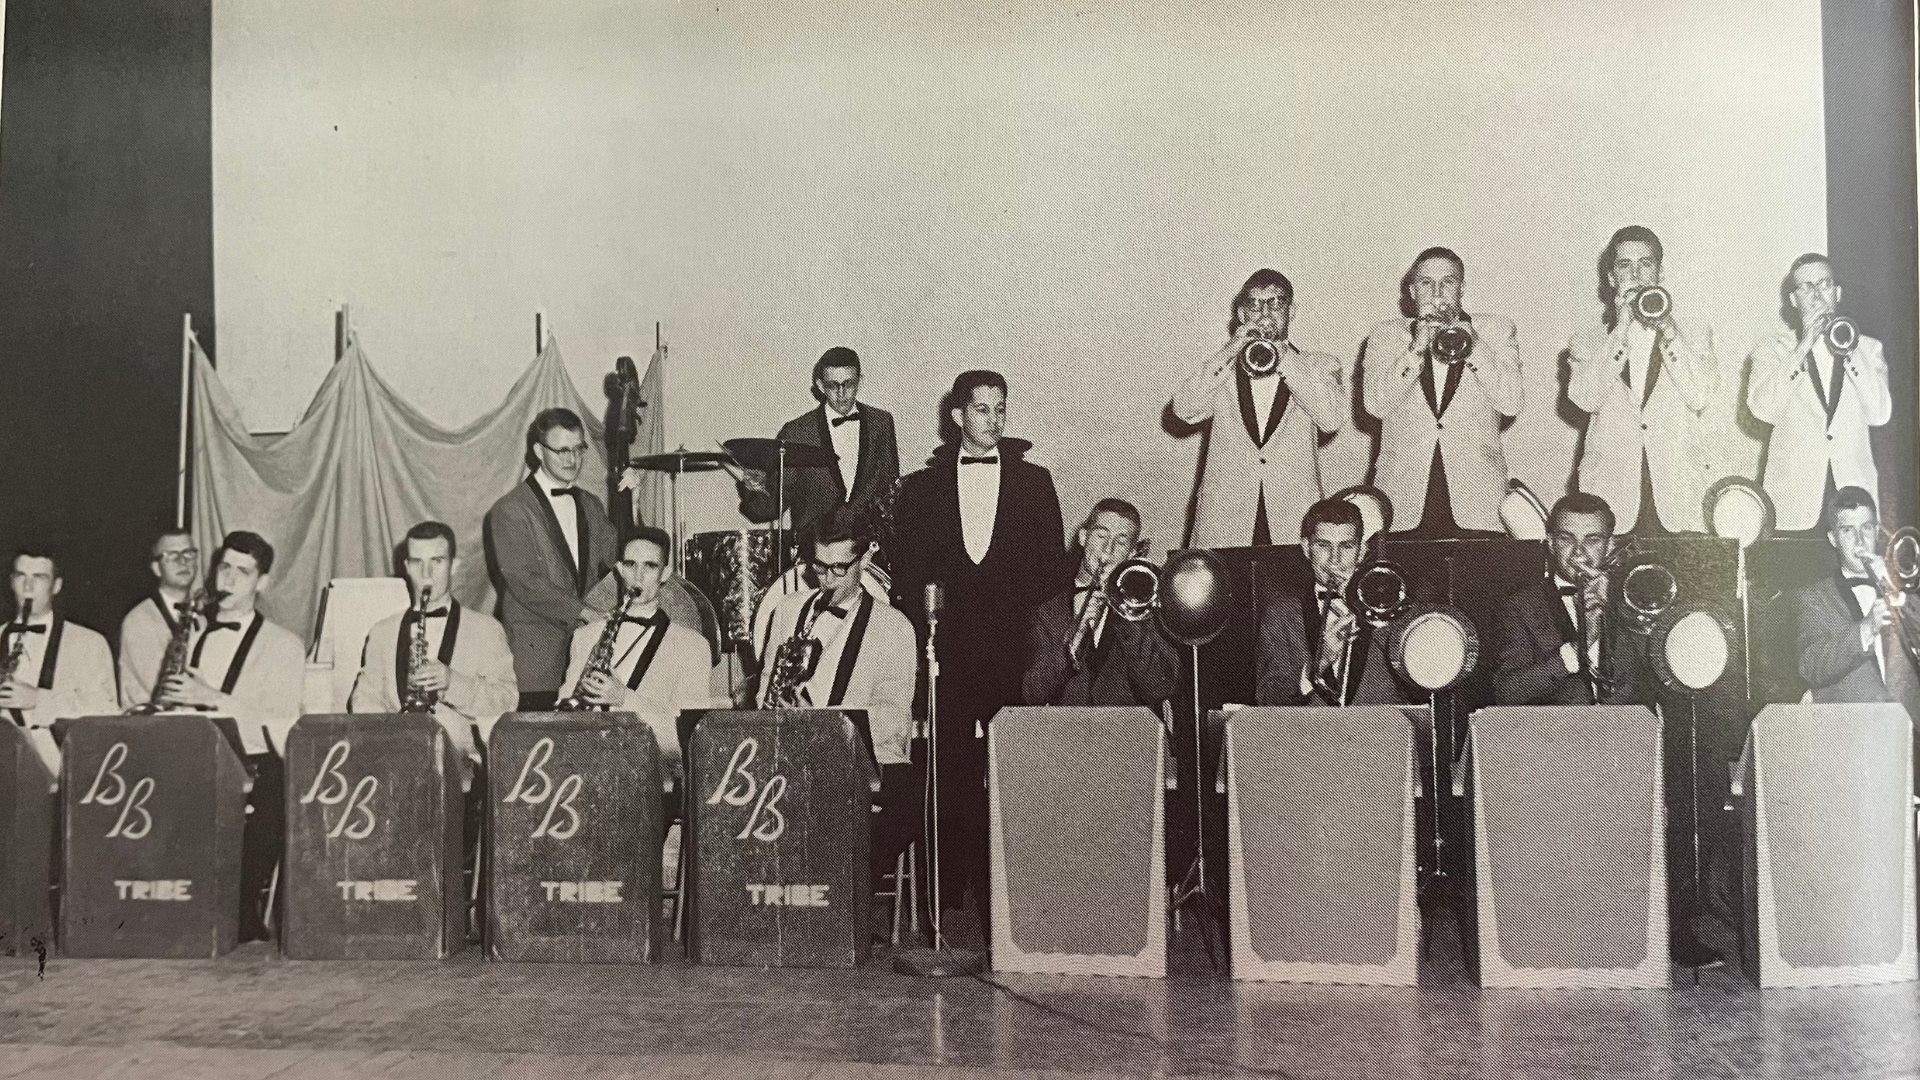 Historical photo of the A-State Jazz Band from the 1960s.  The front row contains saxophones and trombones seated behind box stands, the second row contains standing strumpets and the rhythm section.